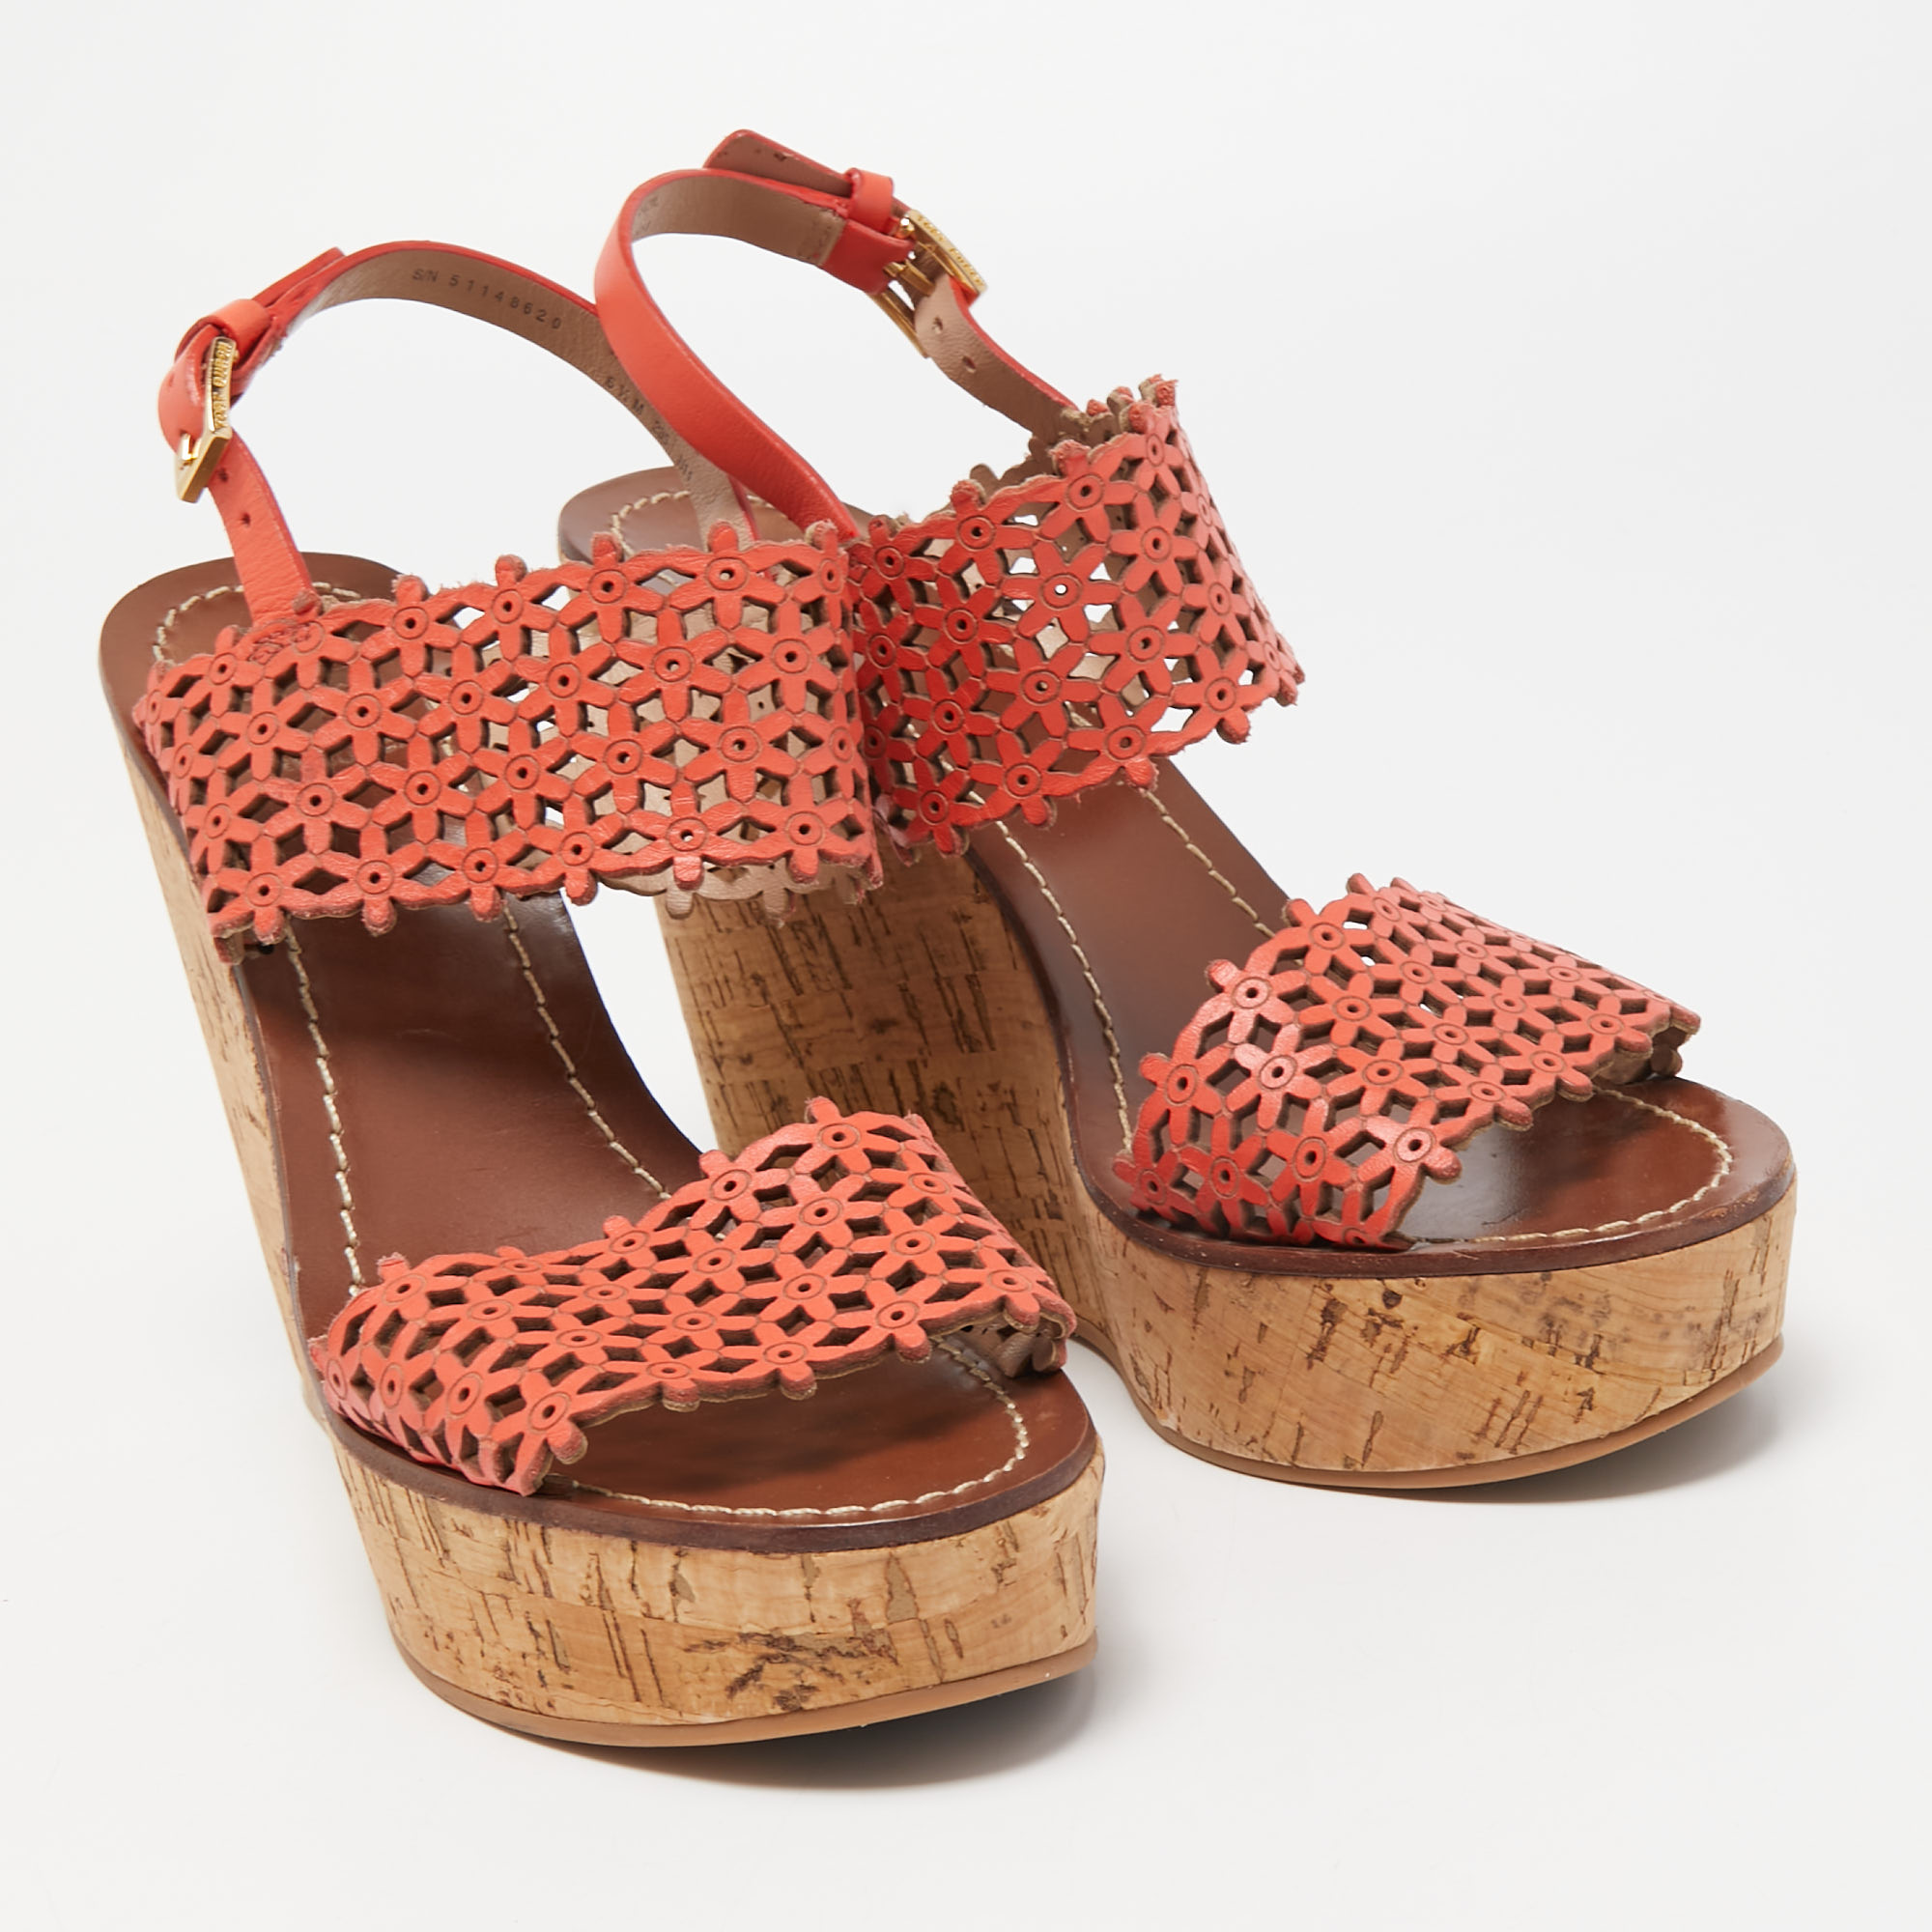 Tory Burch Orange Perforated Leather Daisy Cork Wedge Sandals Size 37